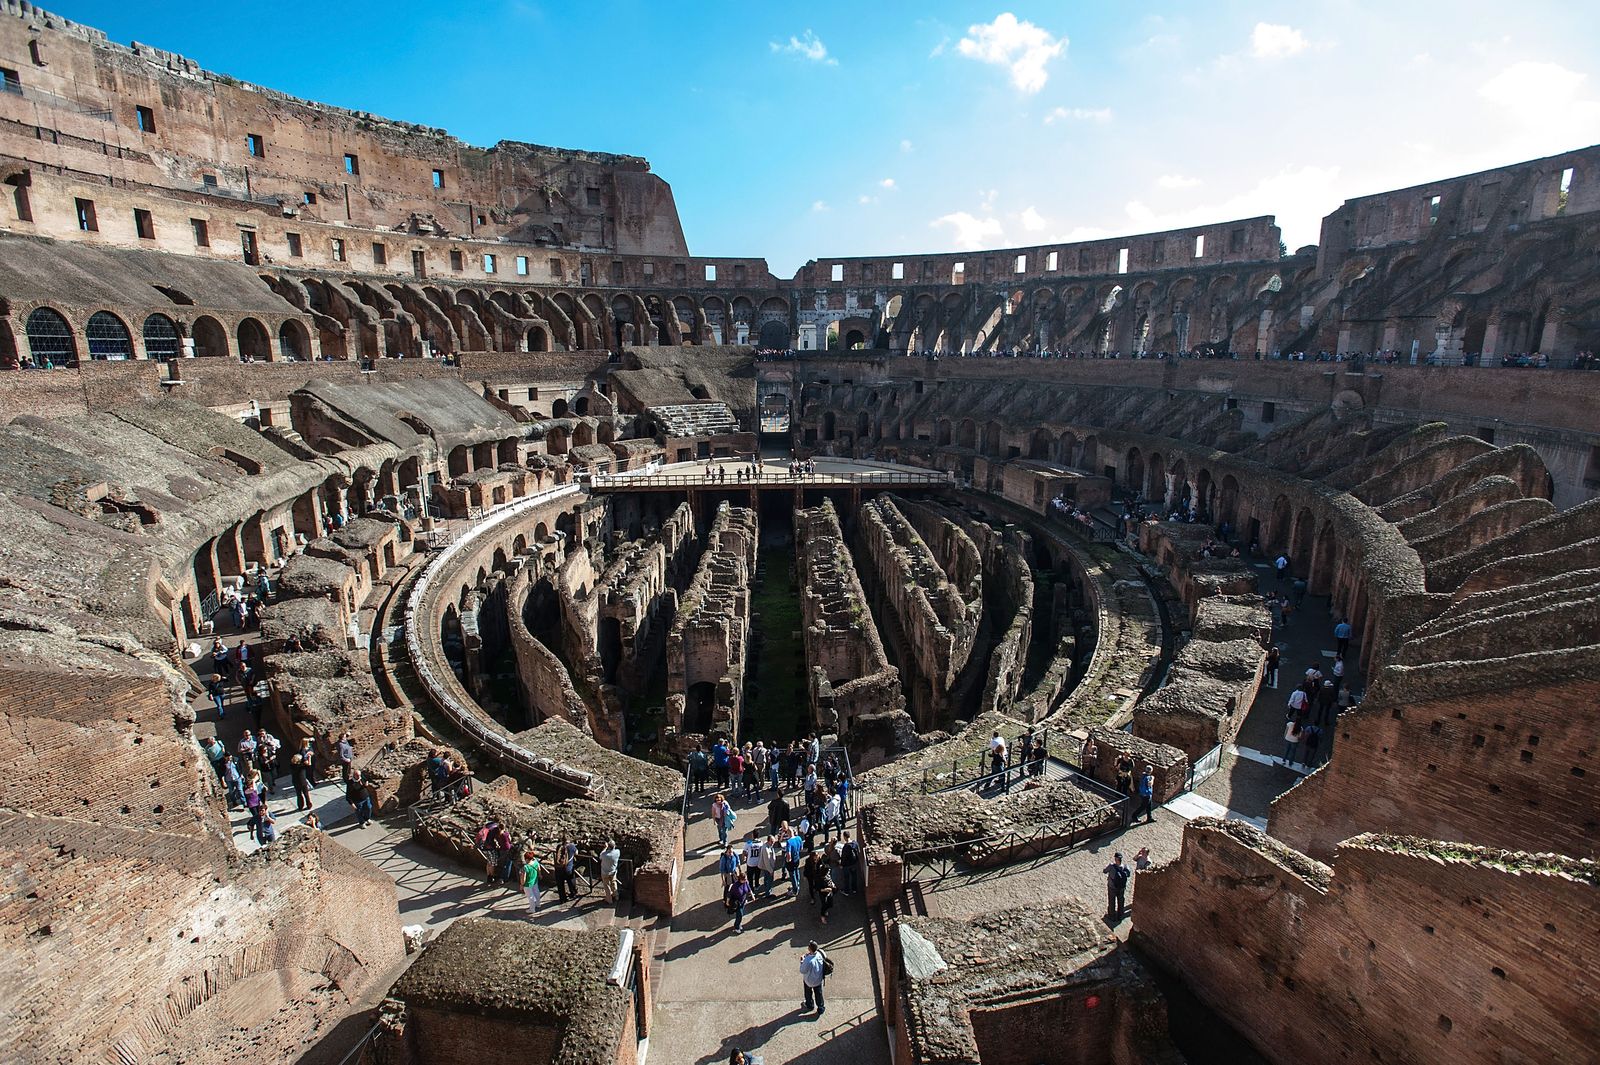 Archaeologists Find 1,900-Year-Old Snacks in Sewers Beneath the Colosseum